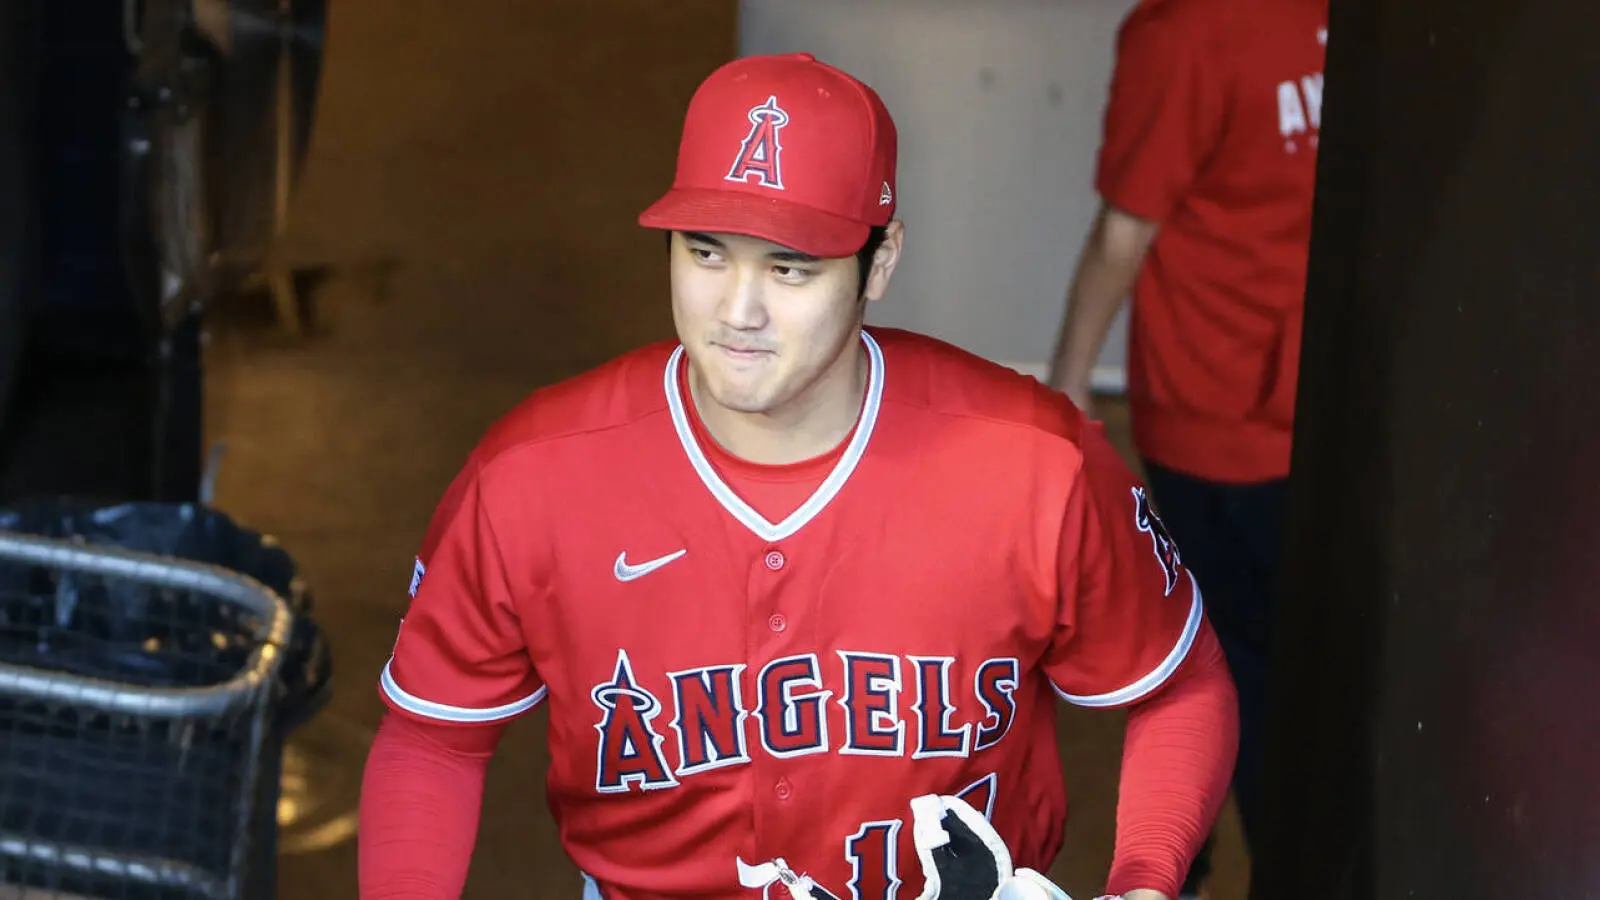 Mets had funny message for Shohei Ohtani on scoreboard